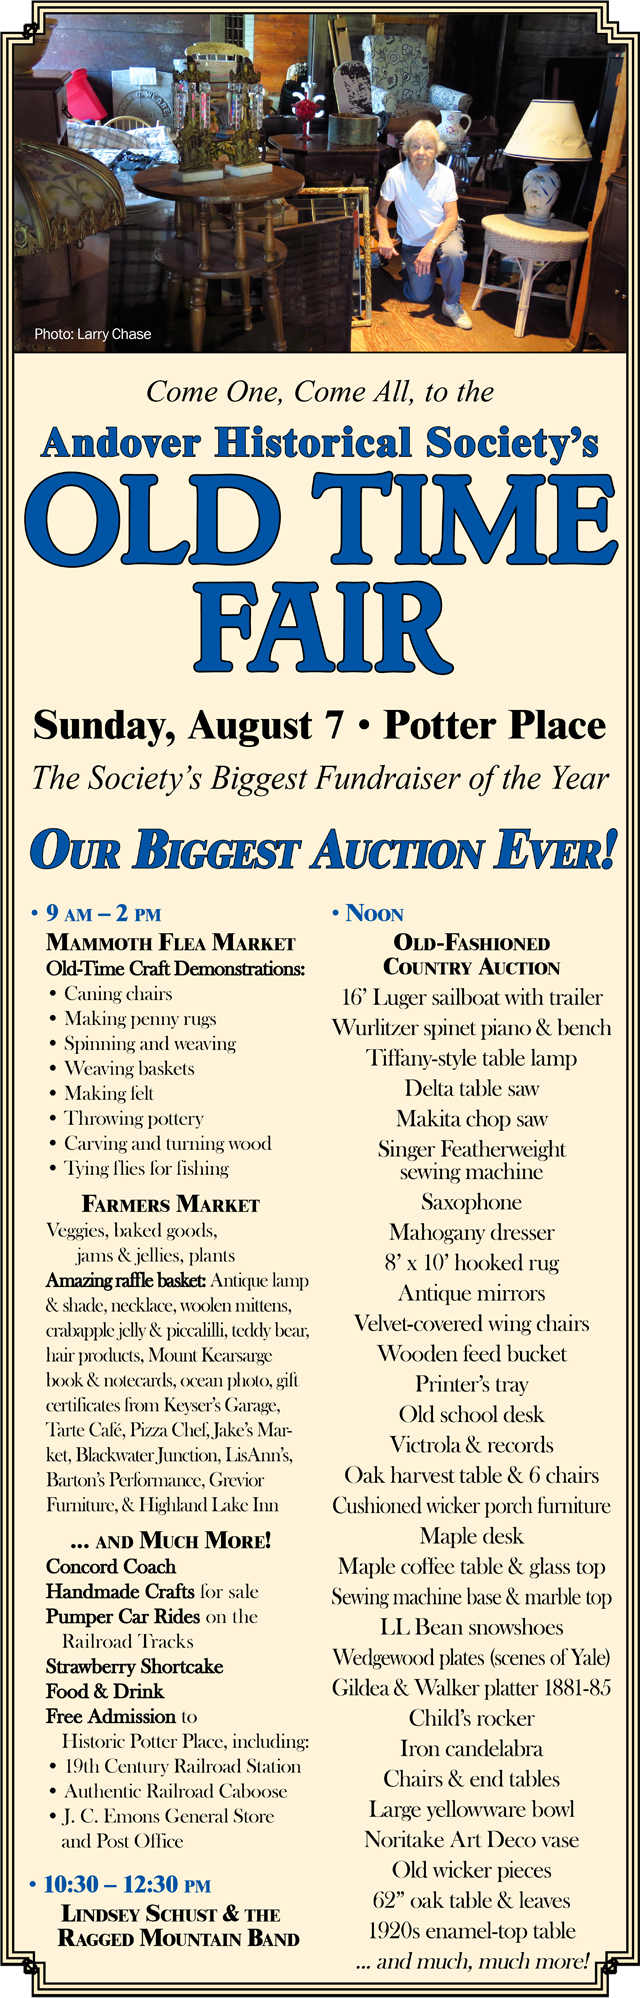 Andover Historical Society’s Old Time Fair, August 7, 2016